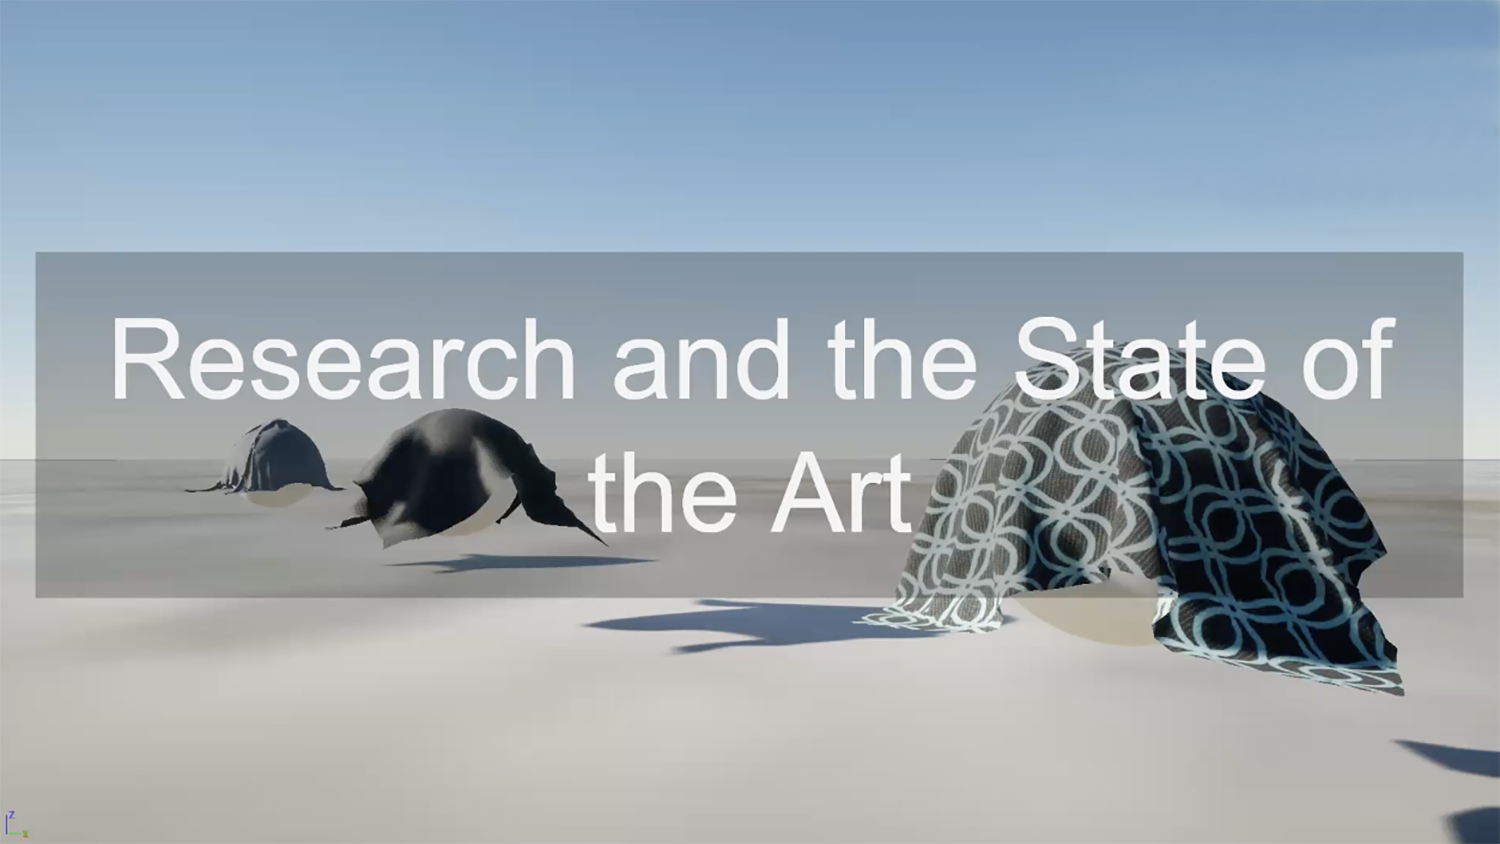 Research and the State of the Art